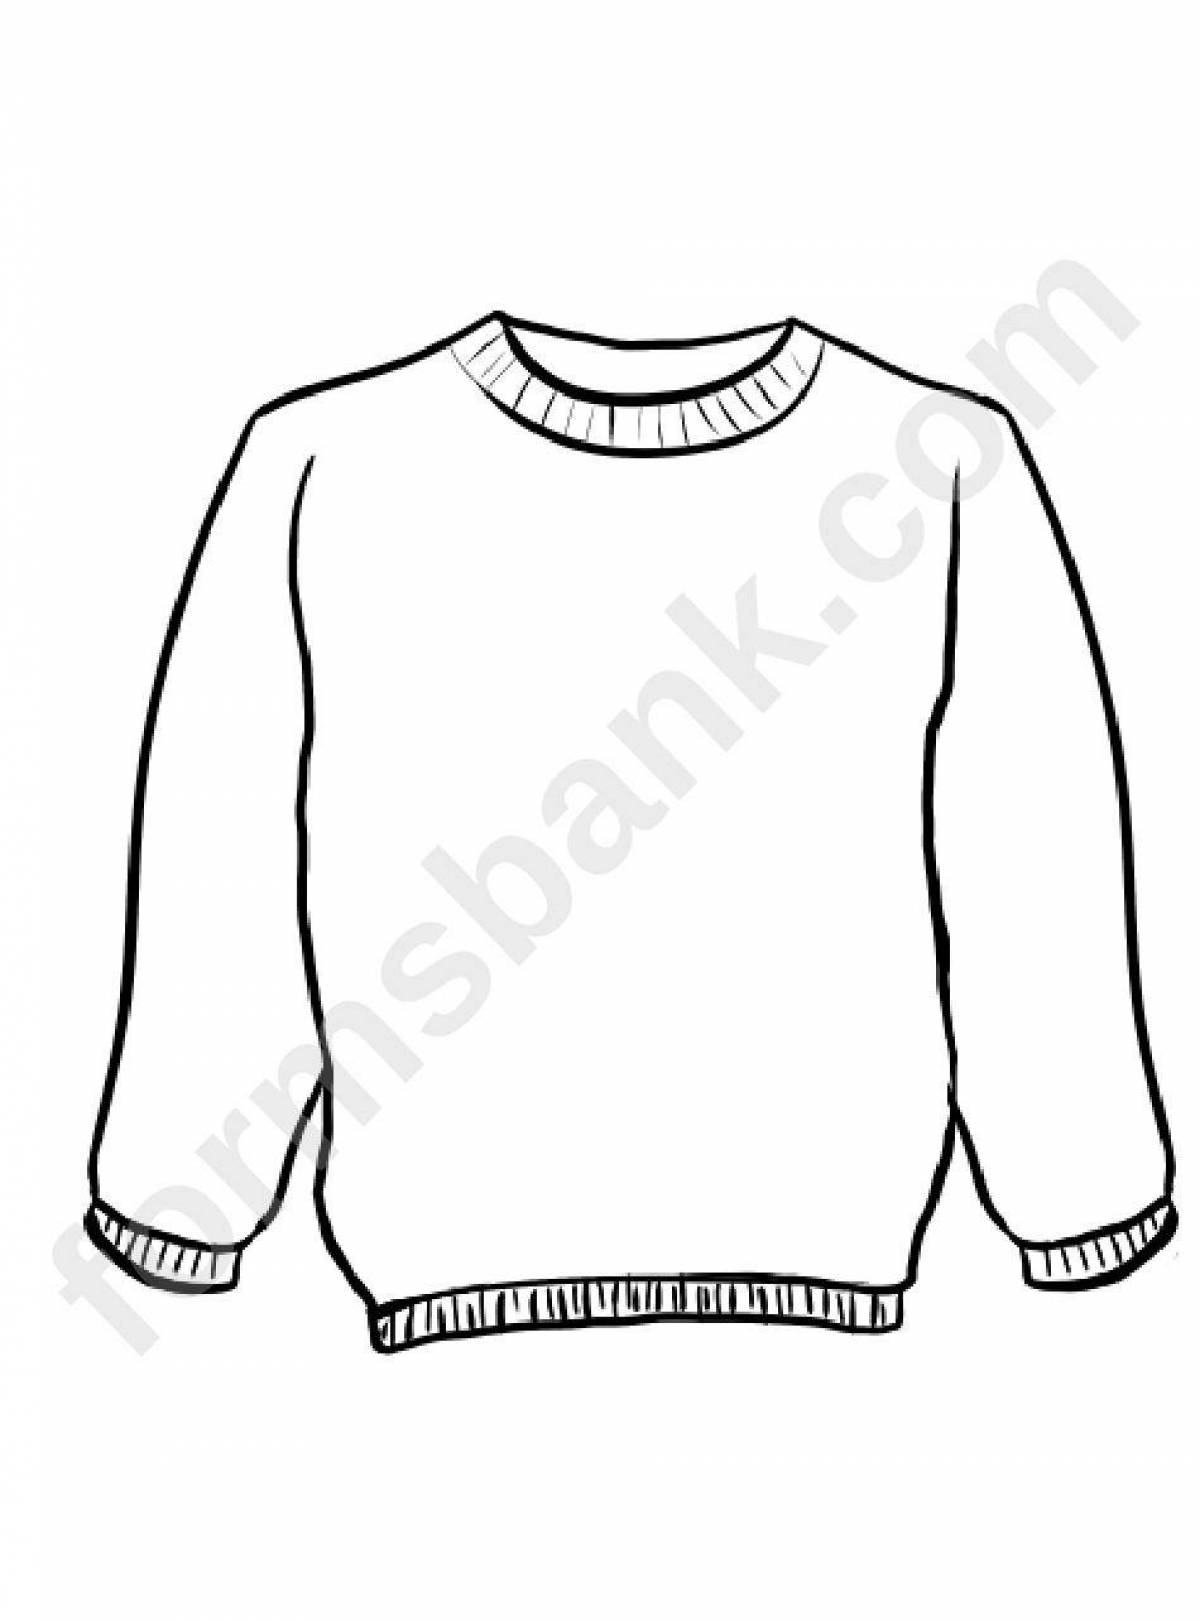 Coloring page sweet jacket for babies